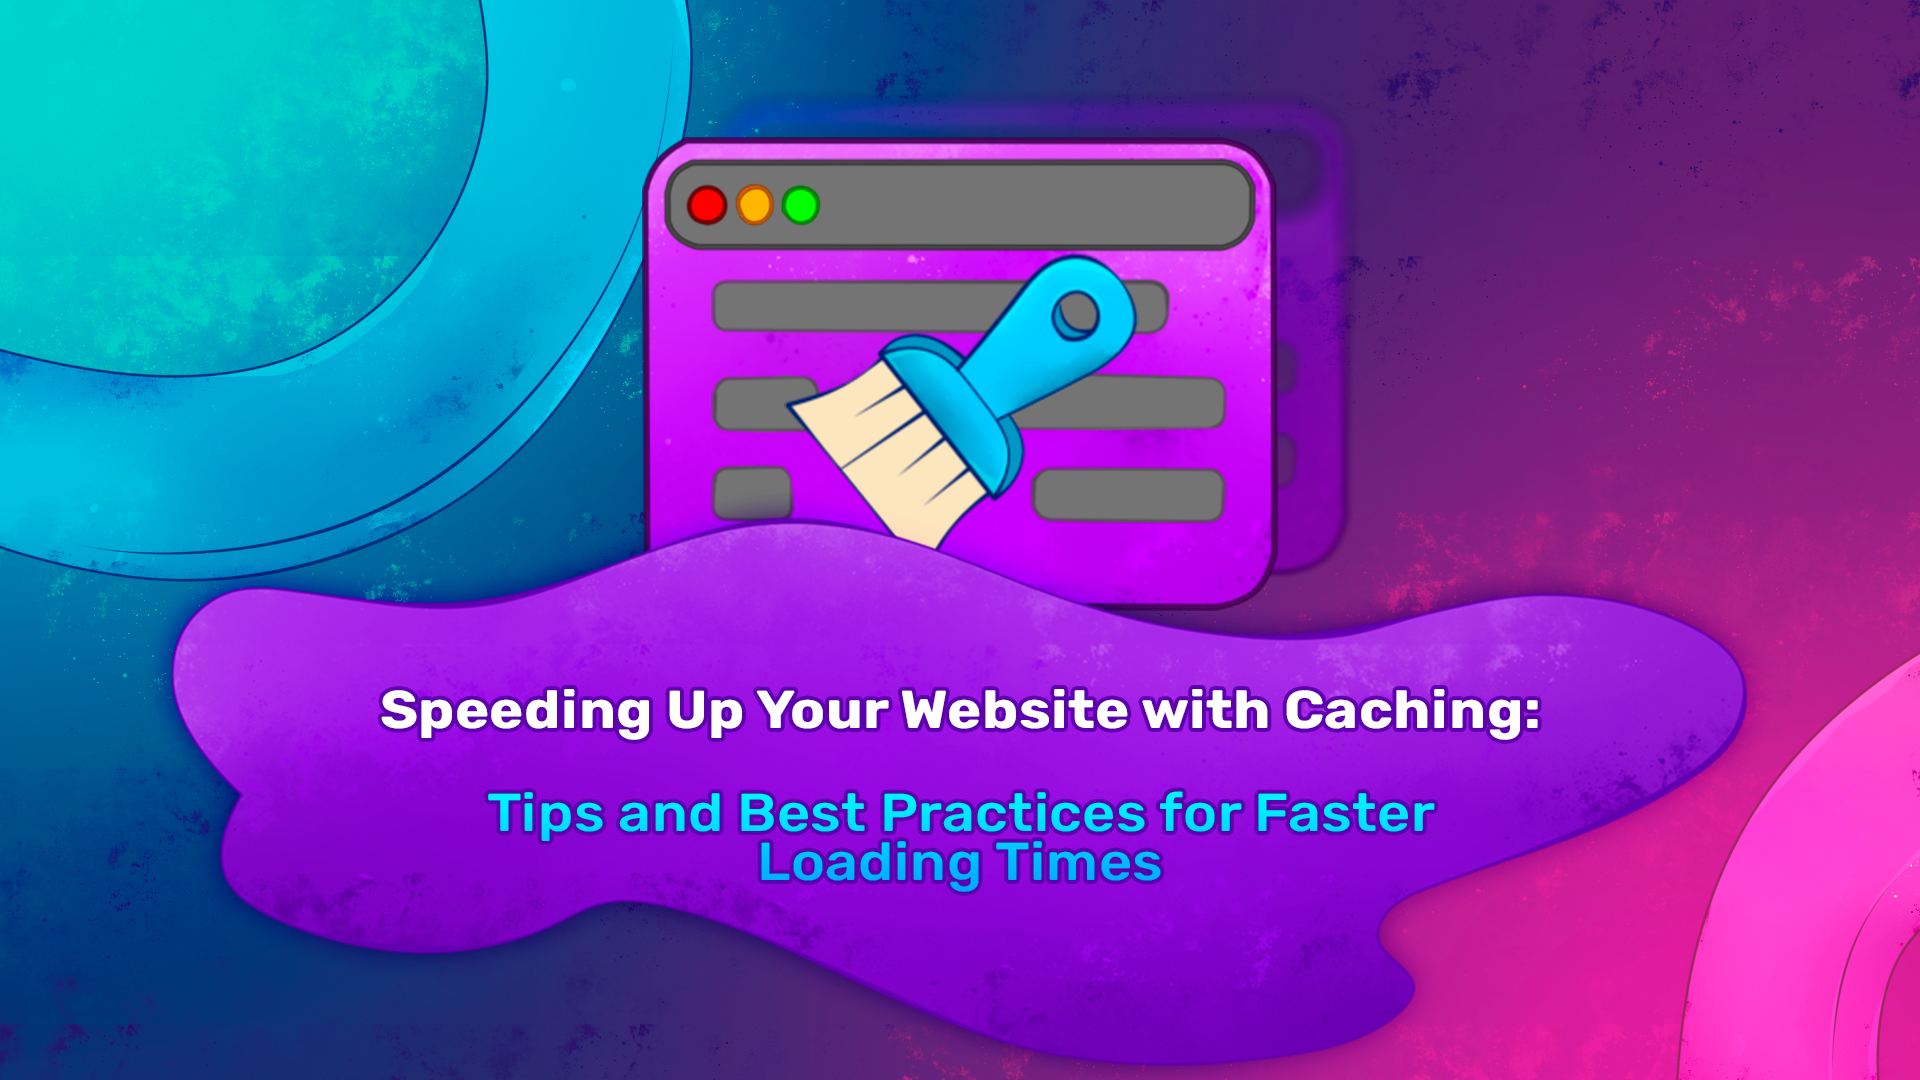 Speeding-Up-Your-Website-with-Caching-Tips-and-Best-Practices-for-Faster-Loading-Times1